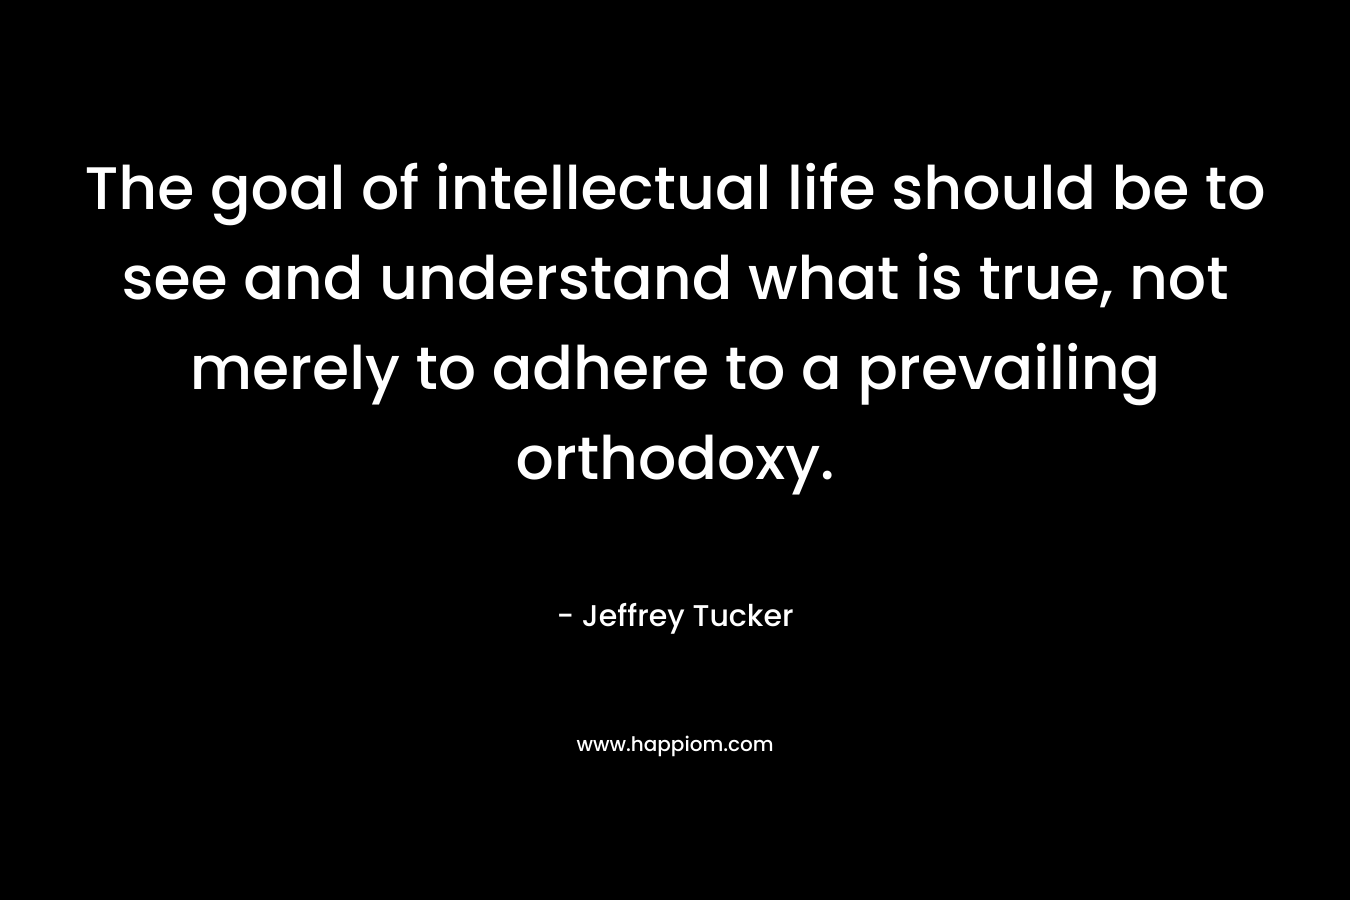 The goal of intellectual life should be to see and understand what is true, not merely to adhere to a prevailing orthodoxy. – Jeffrey Tucker